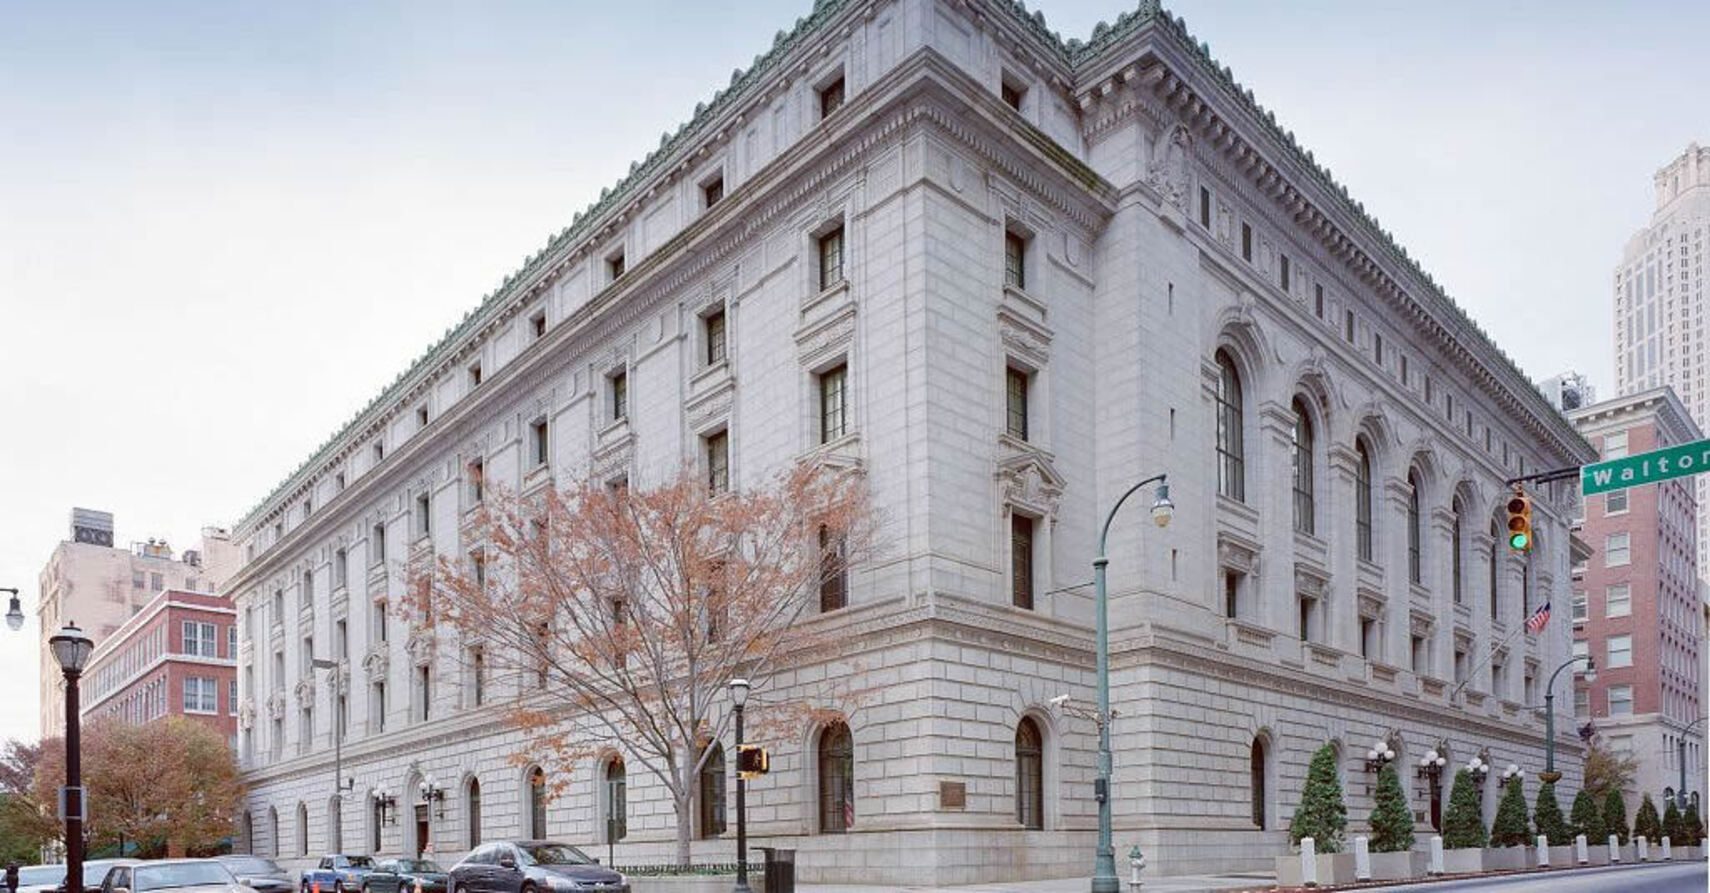 Eleventh Circuit Flips As Senate Confirms Two Trump Appointees